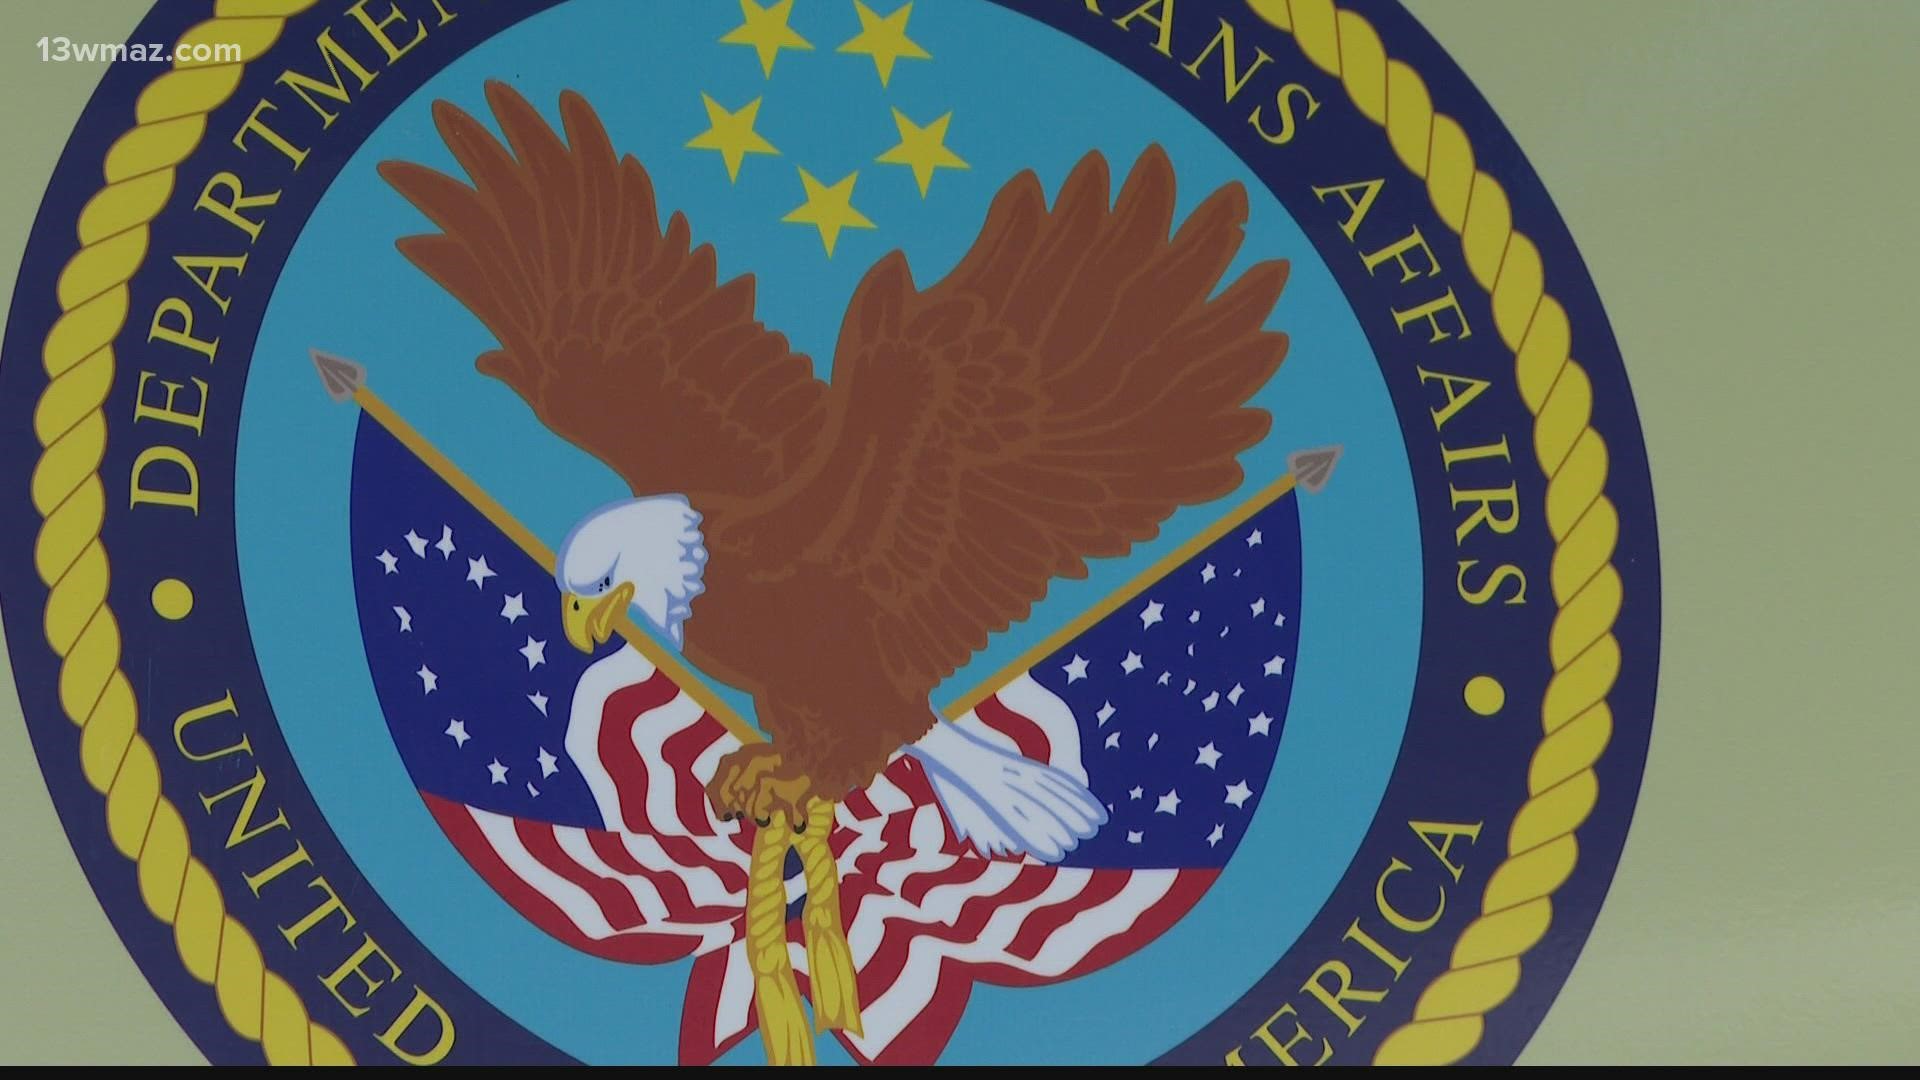 The VA says it's confident the risk of infectious diseases is very low, but recommends testing for bloodborne illnesses like HIV and hepatitis.